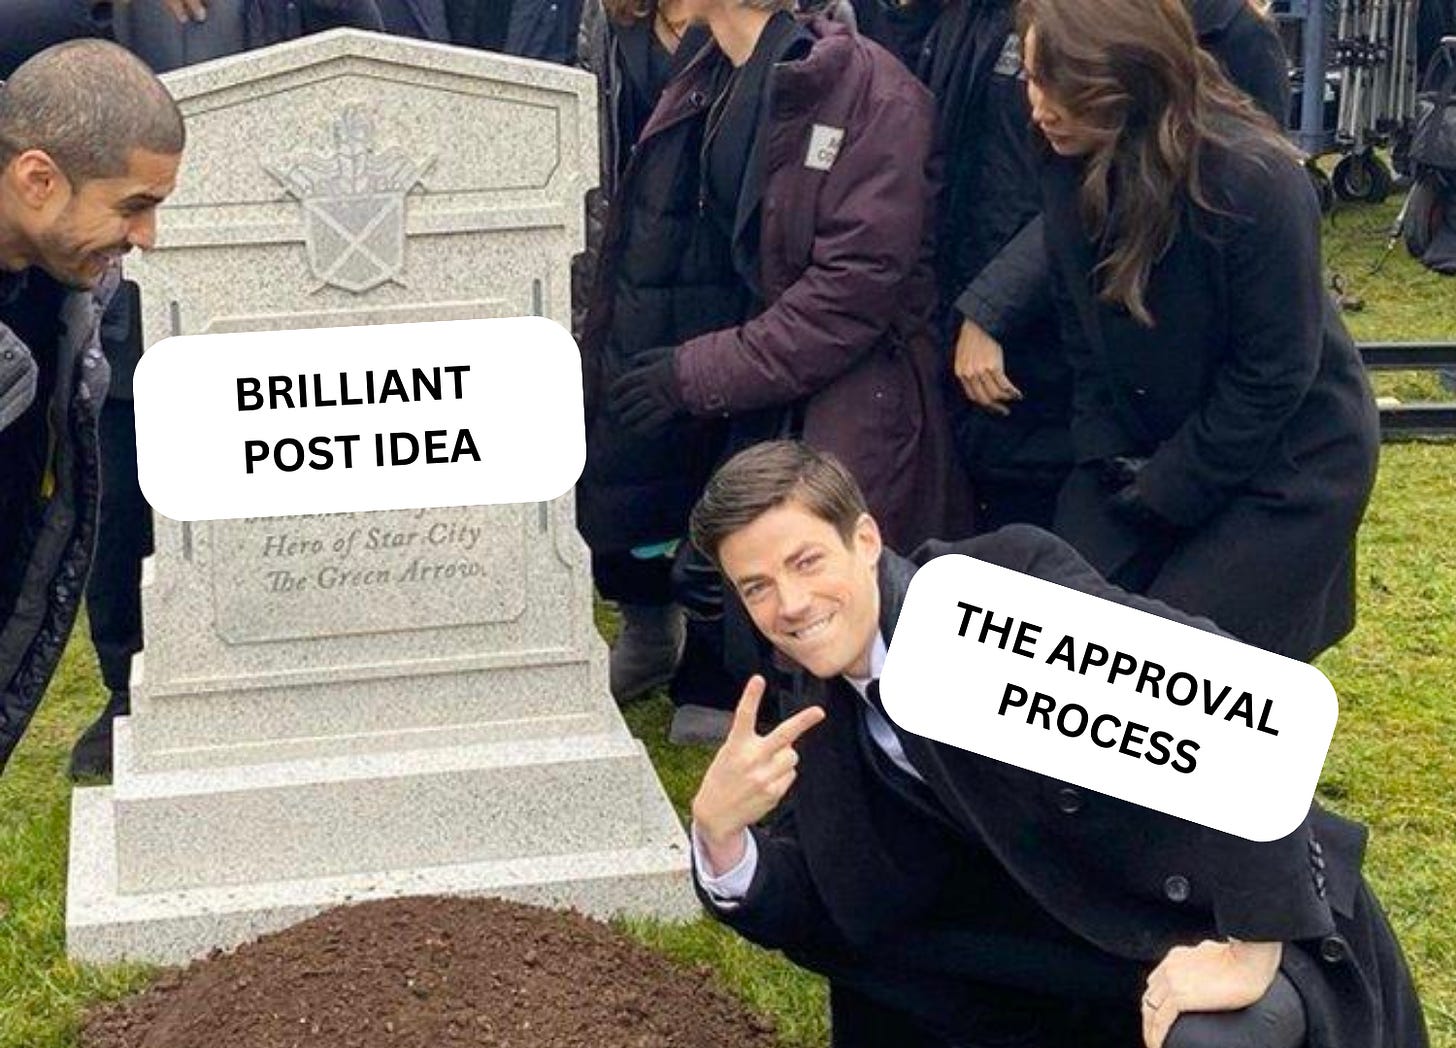 Meme of a tombstone and someone posing with it making a peace sign. Gravestone says "Brilliant post idea" and person making peace sign says "the approval process".